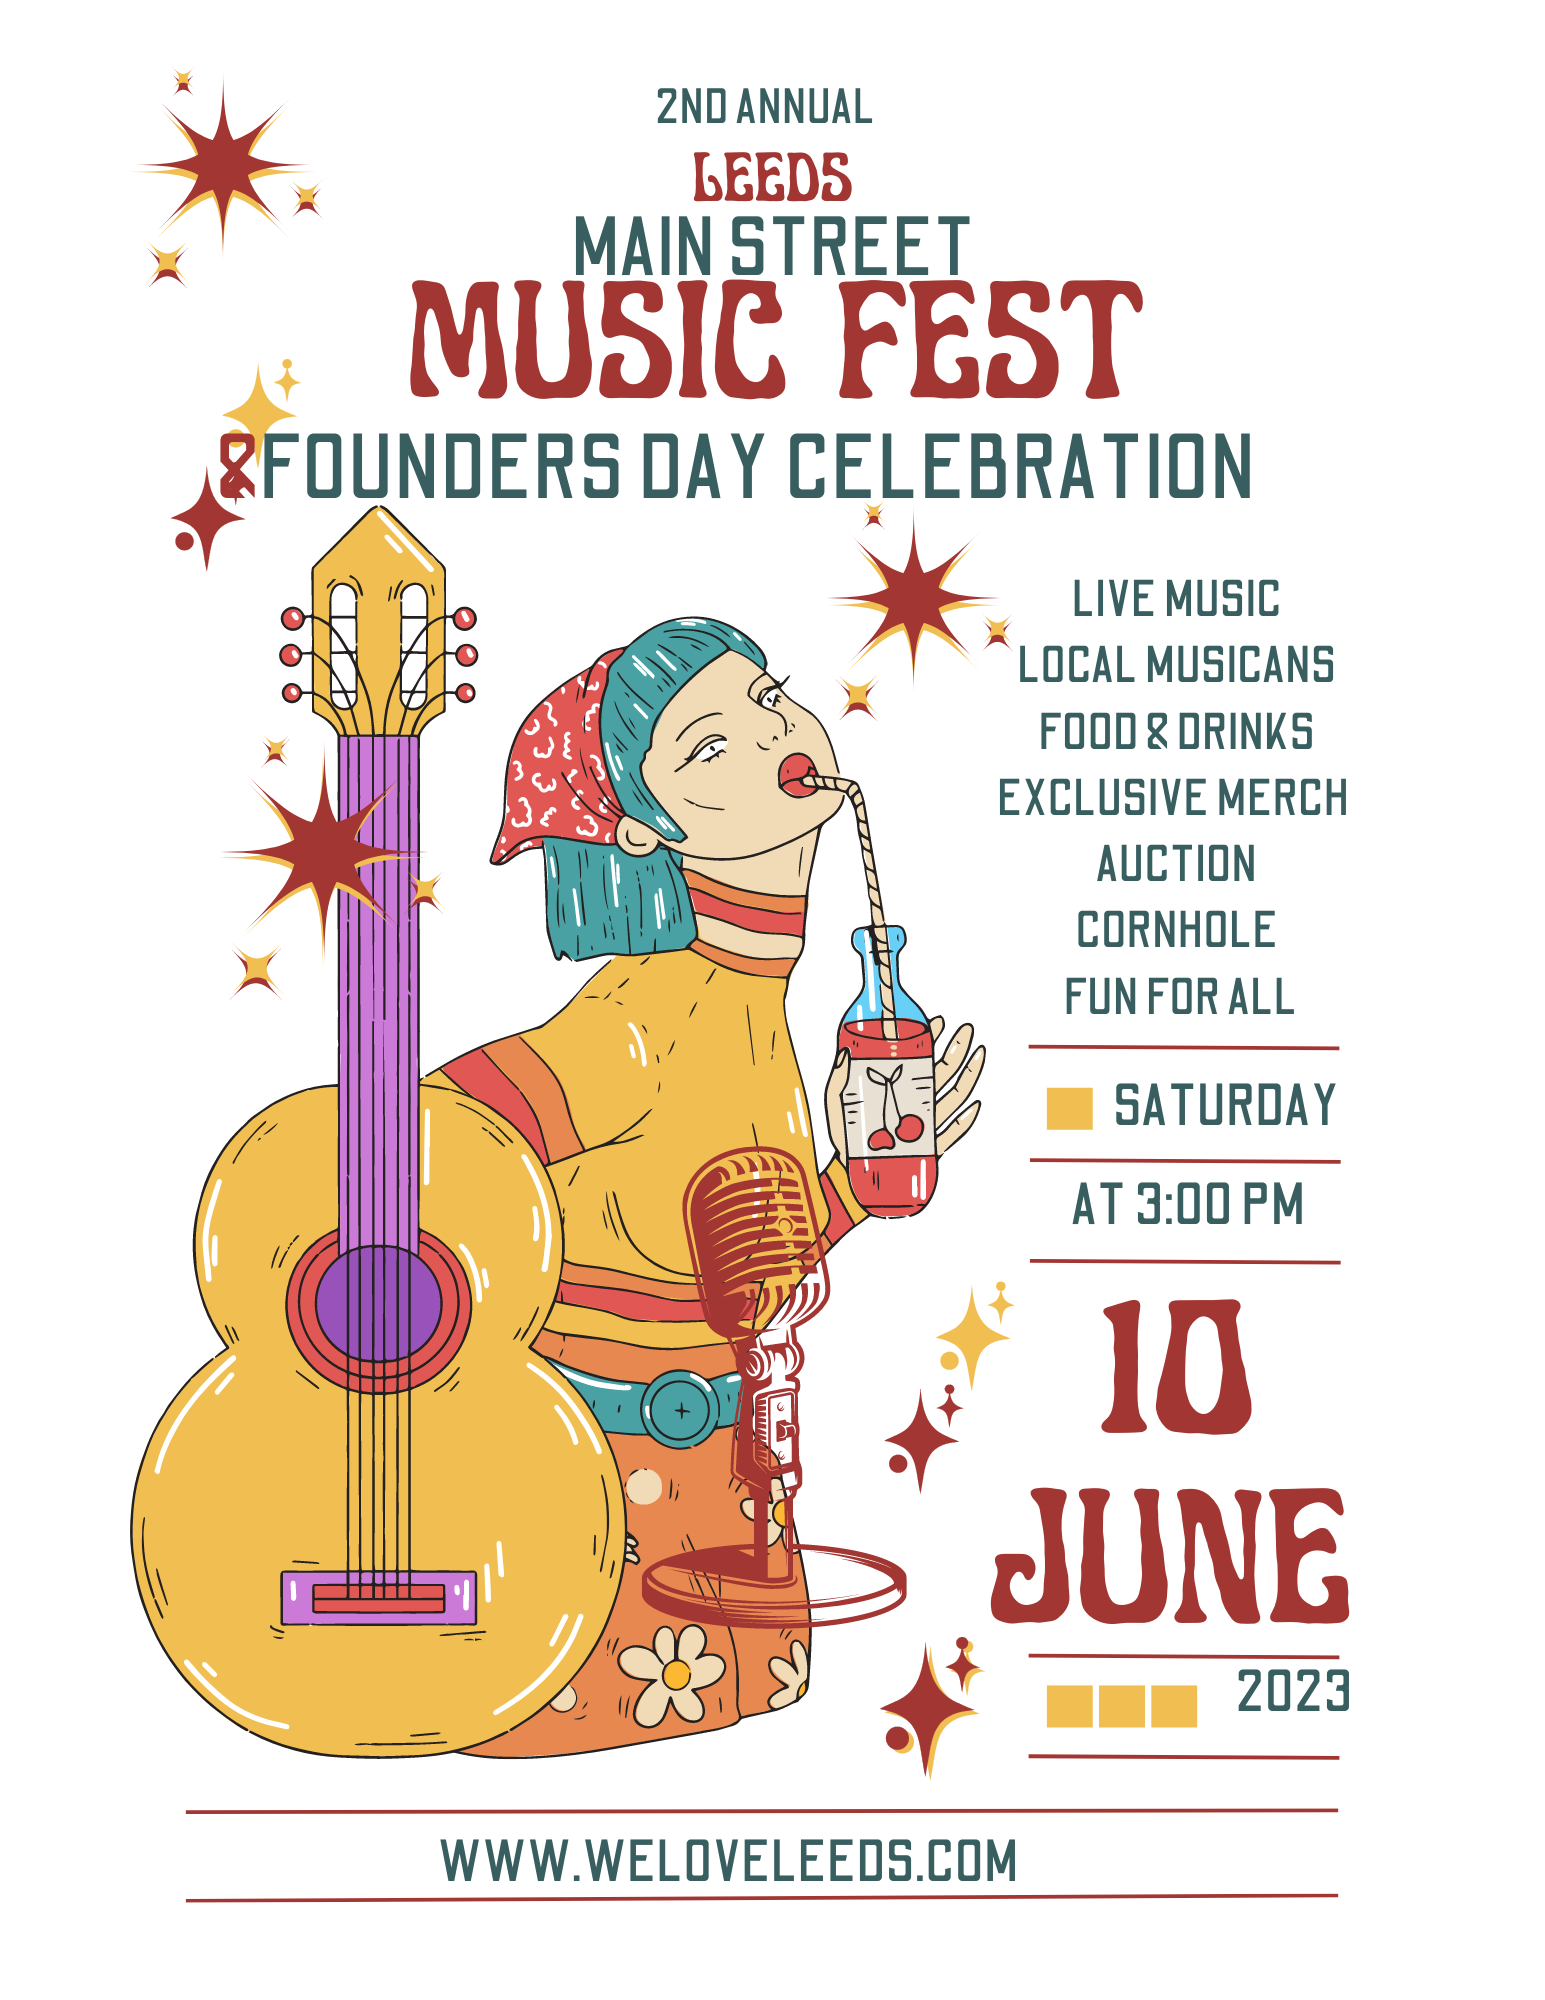 Leeds to hold annual Main Street Music Fest on June 10